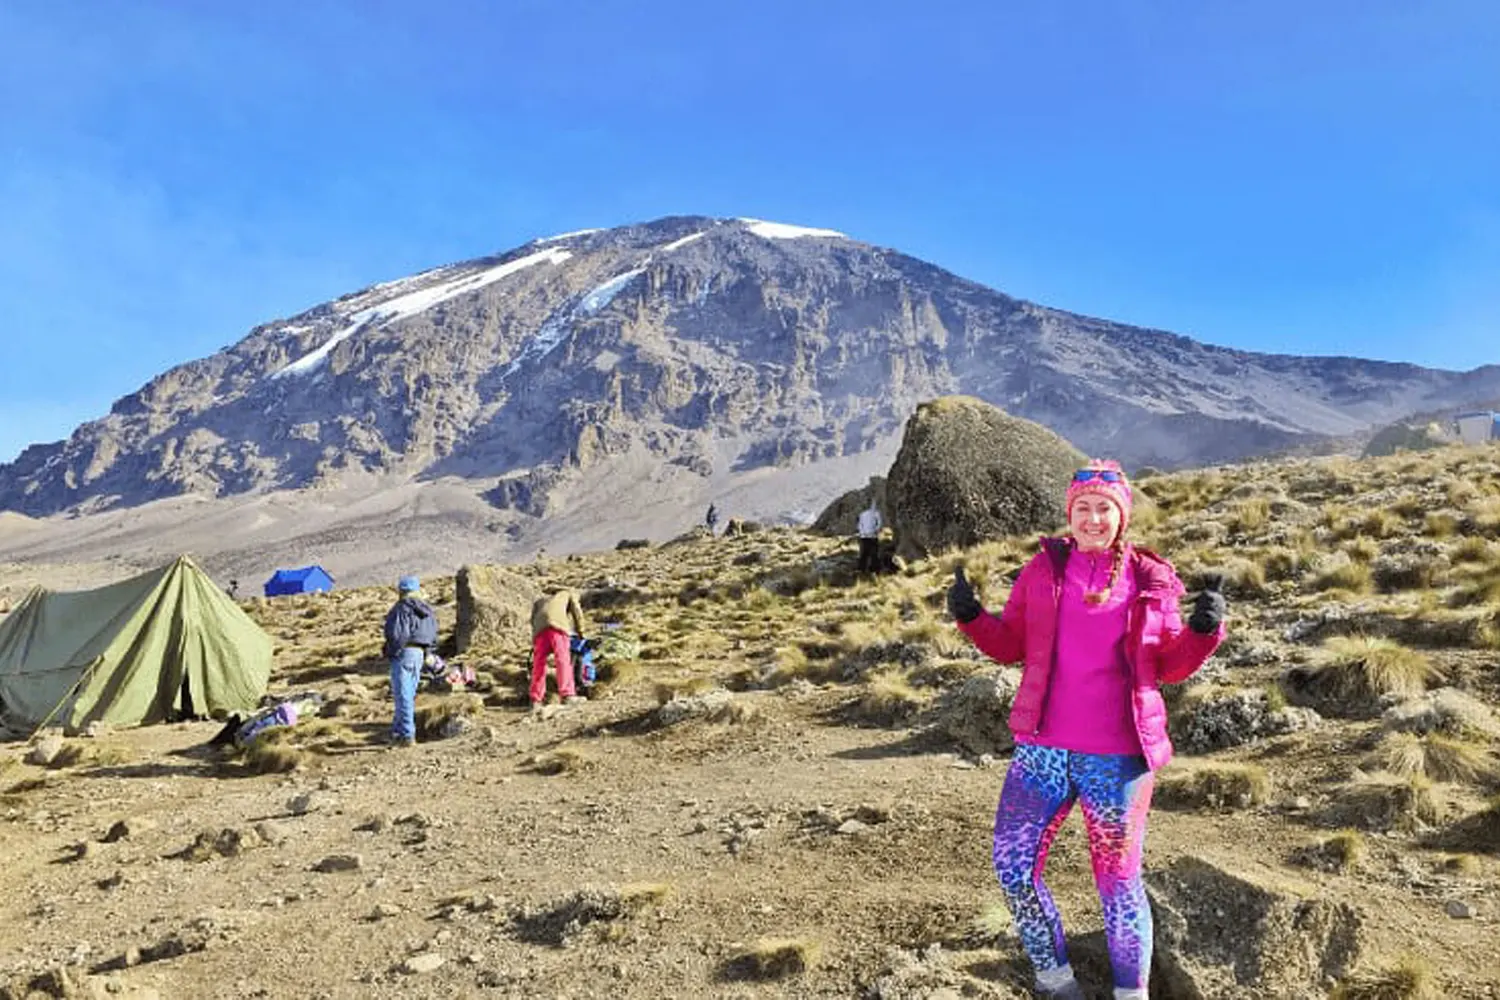 How Much Does It Cost to Climb Mt. Kilimanjaro?